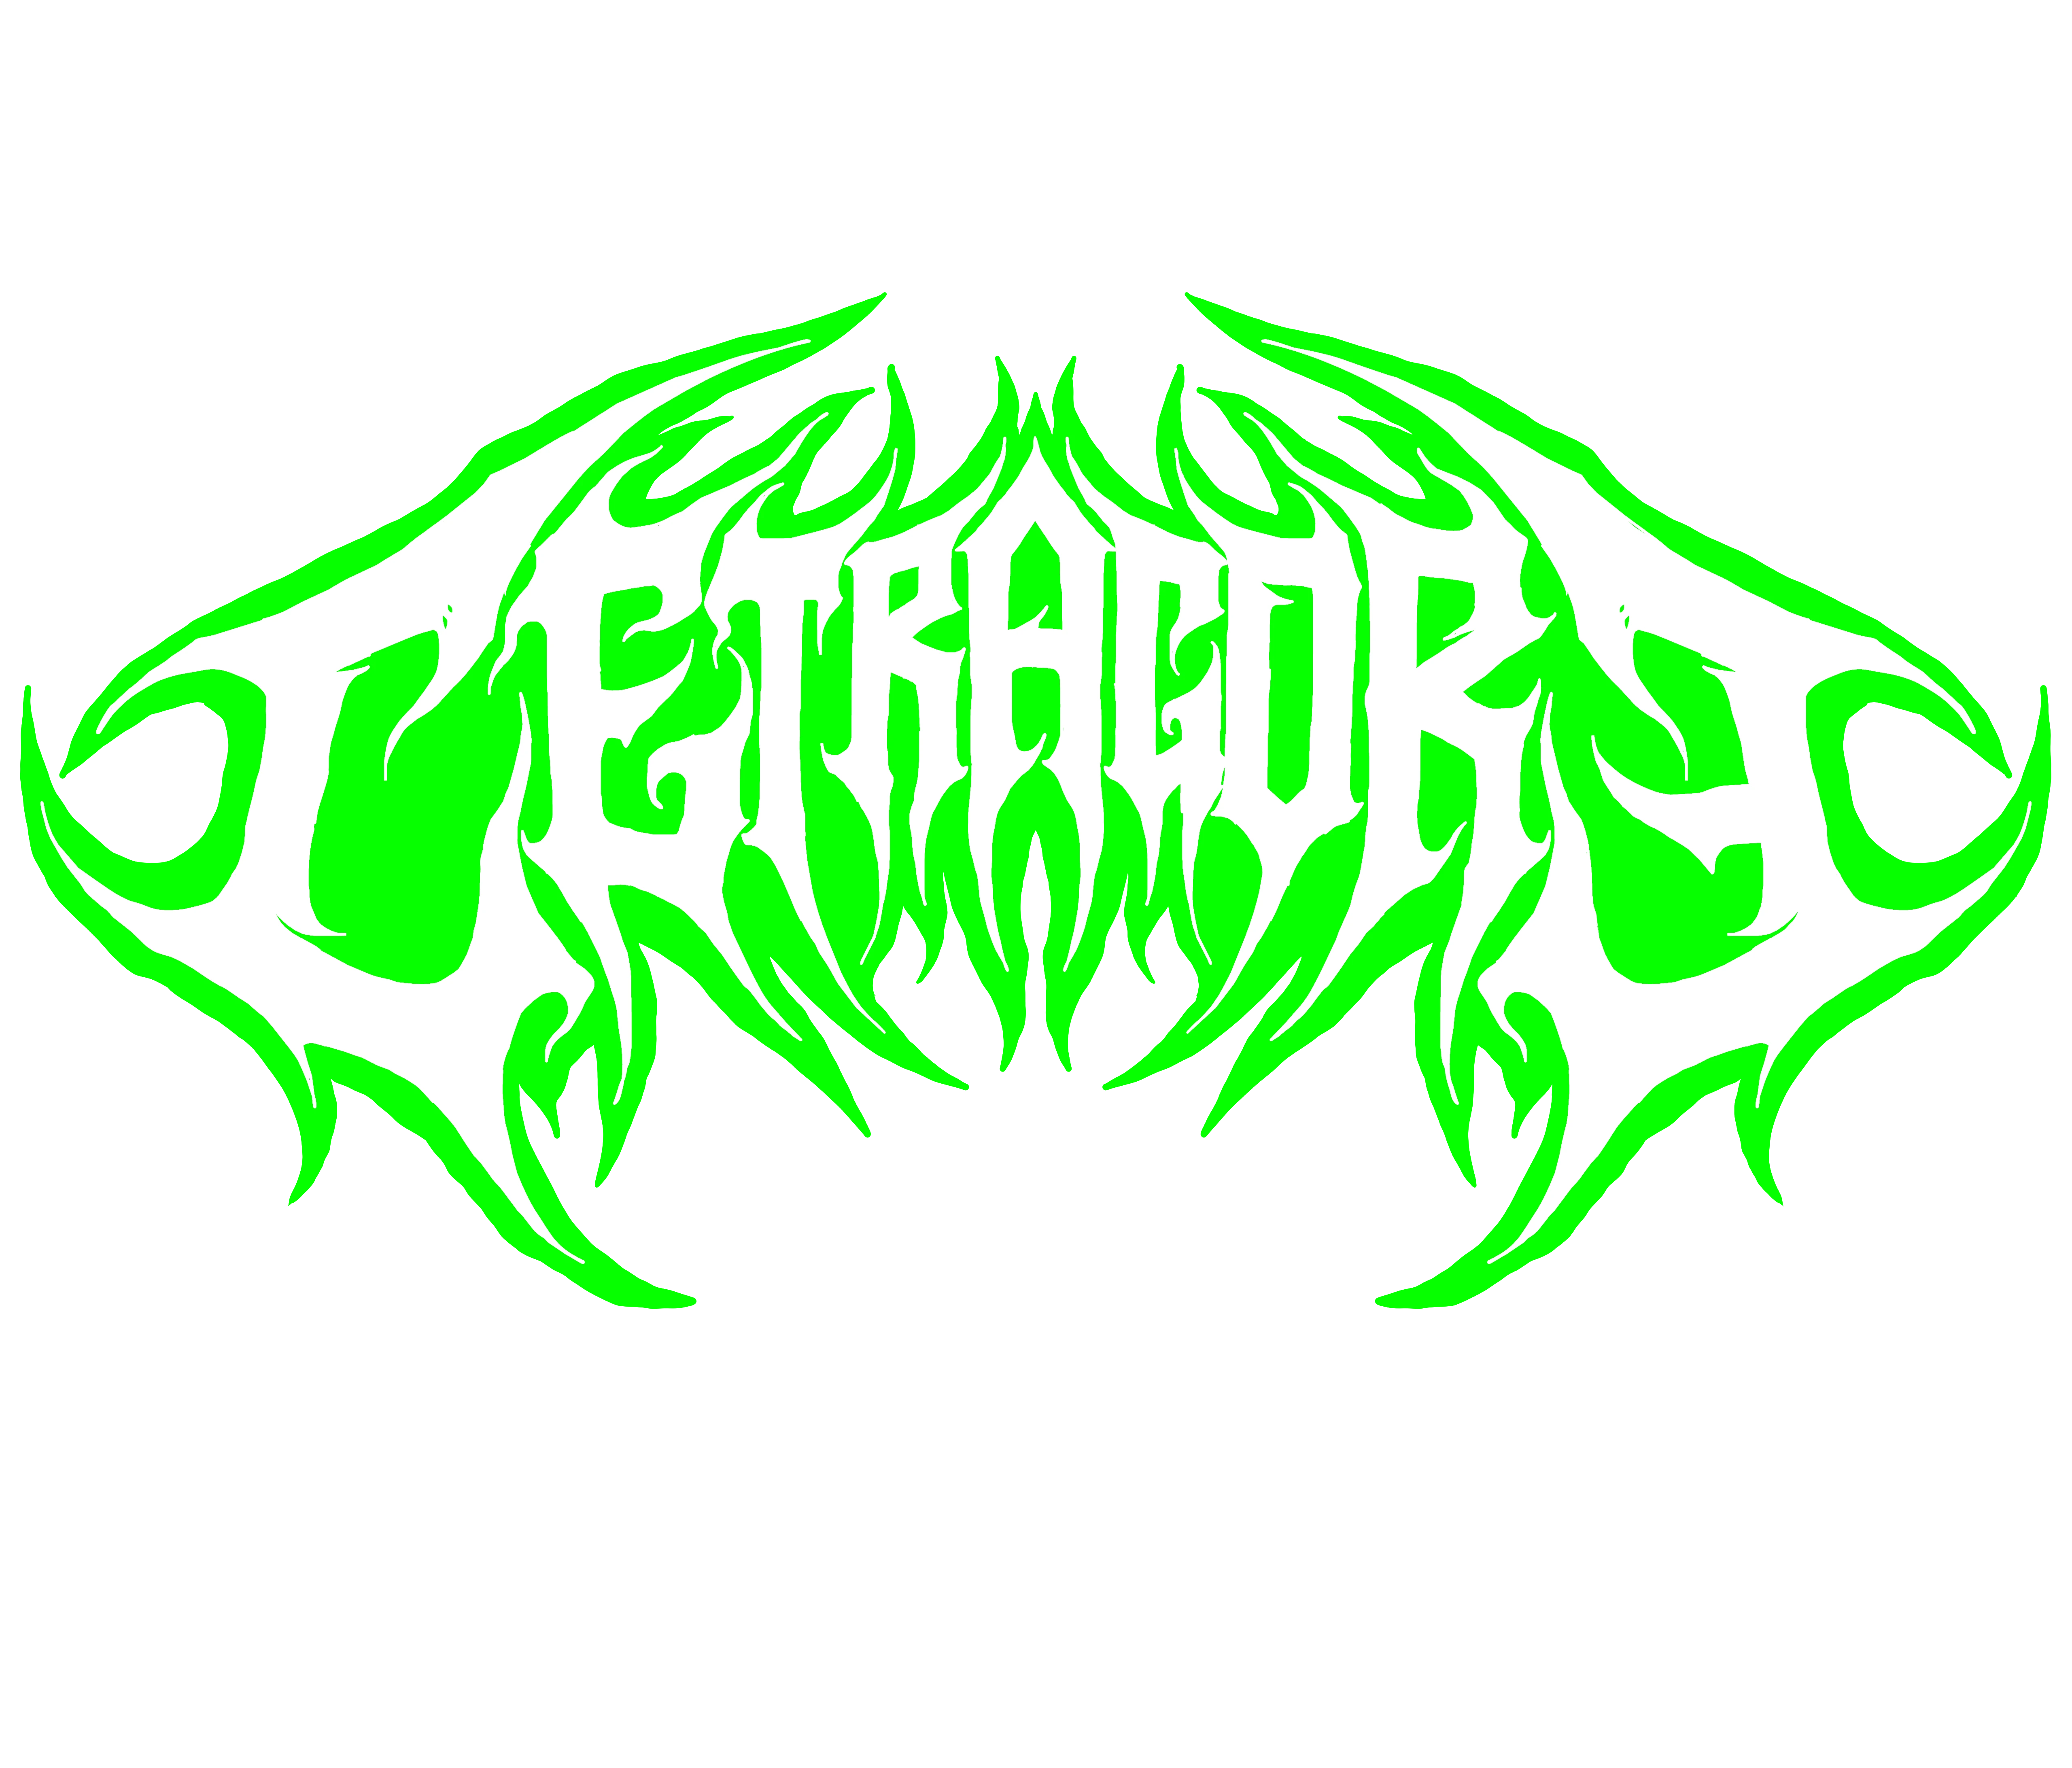 The logo of the band.